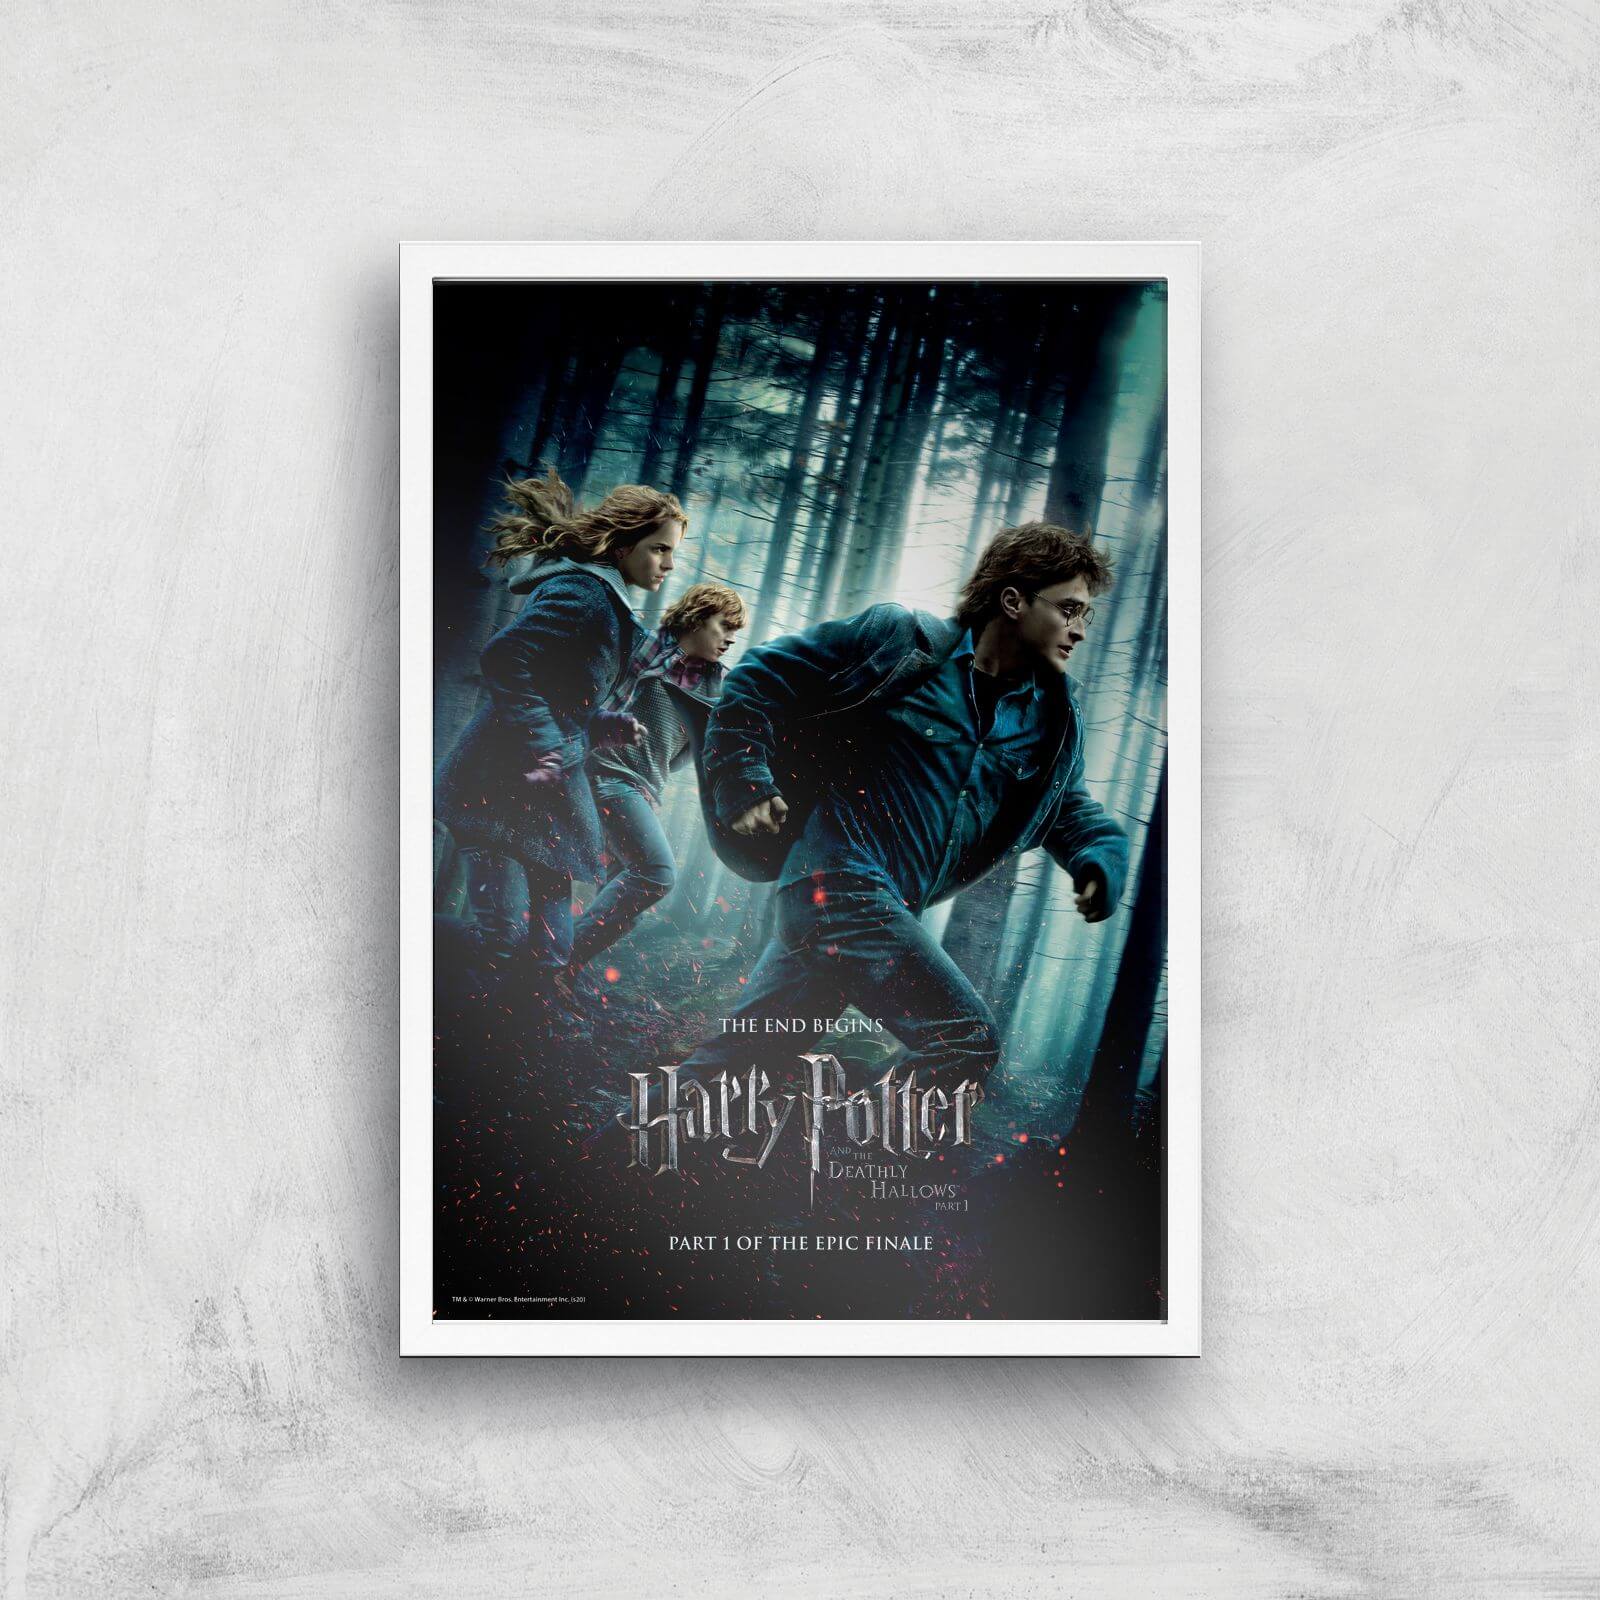 Harry Potter and the Deathly Hallows Part 1 Giclee Art Print - A3 - White Frame